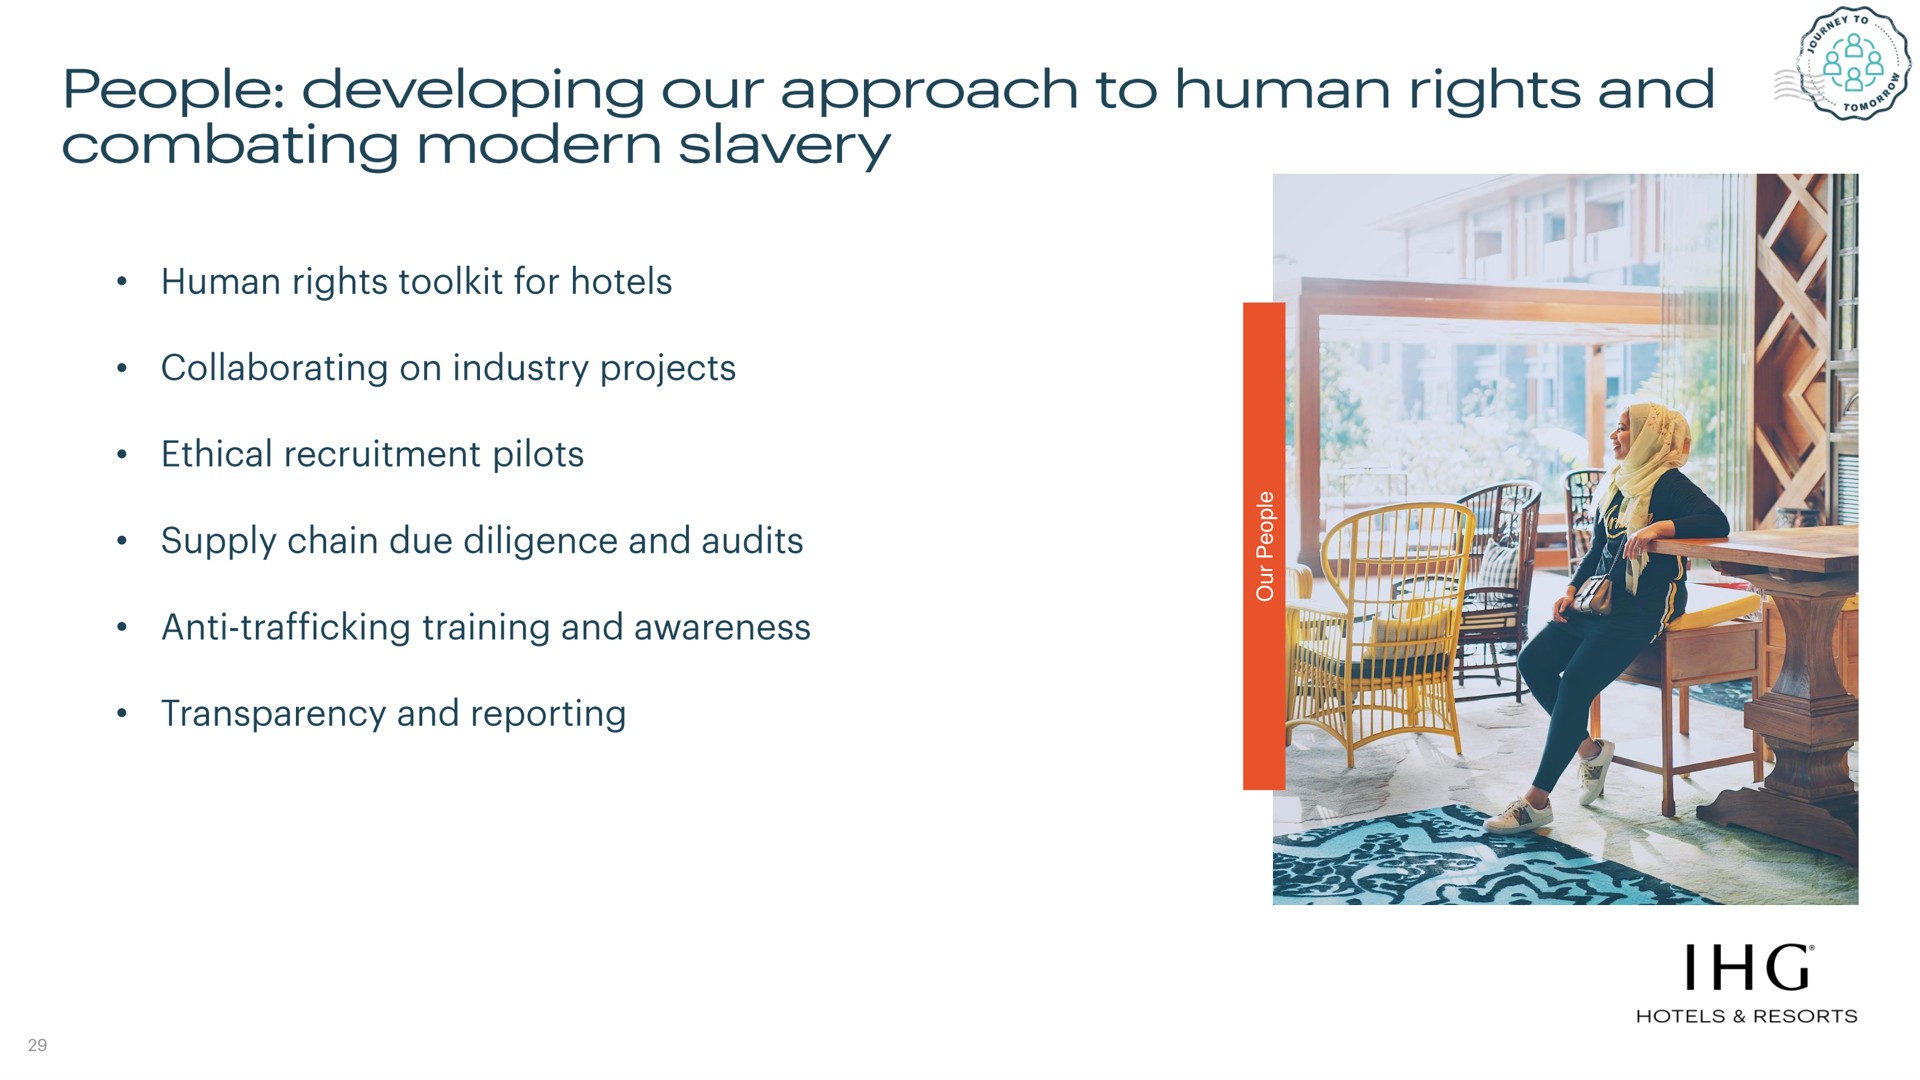 people developing our approach to human rights and combating modern slavery | IHG Hotels